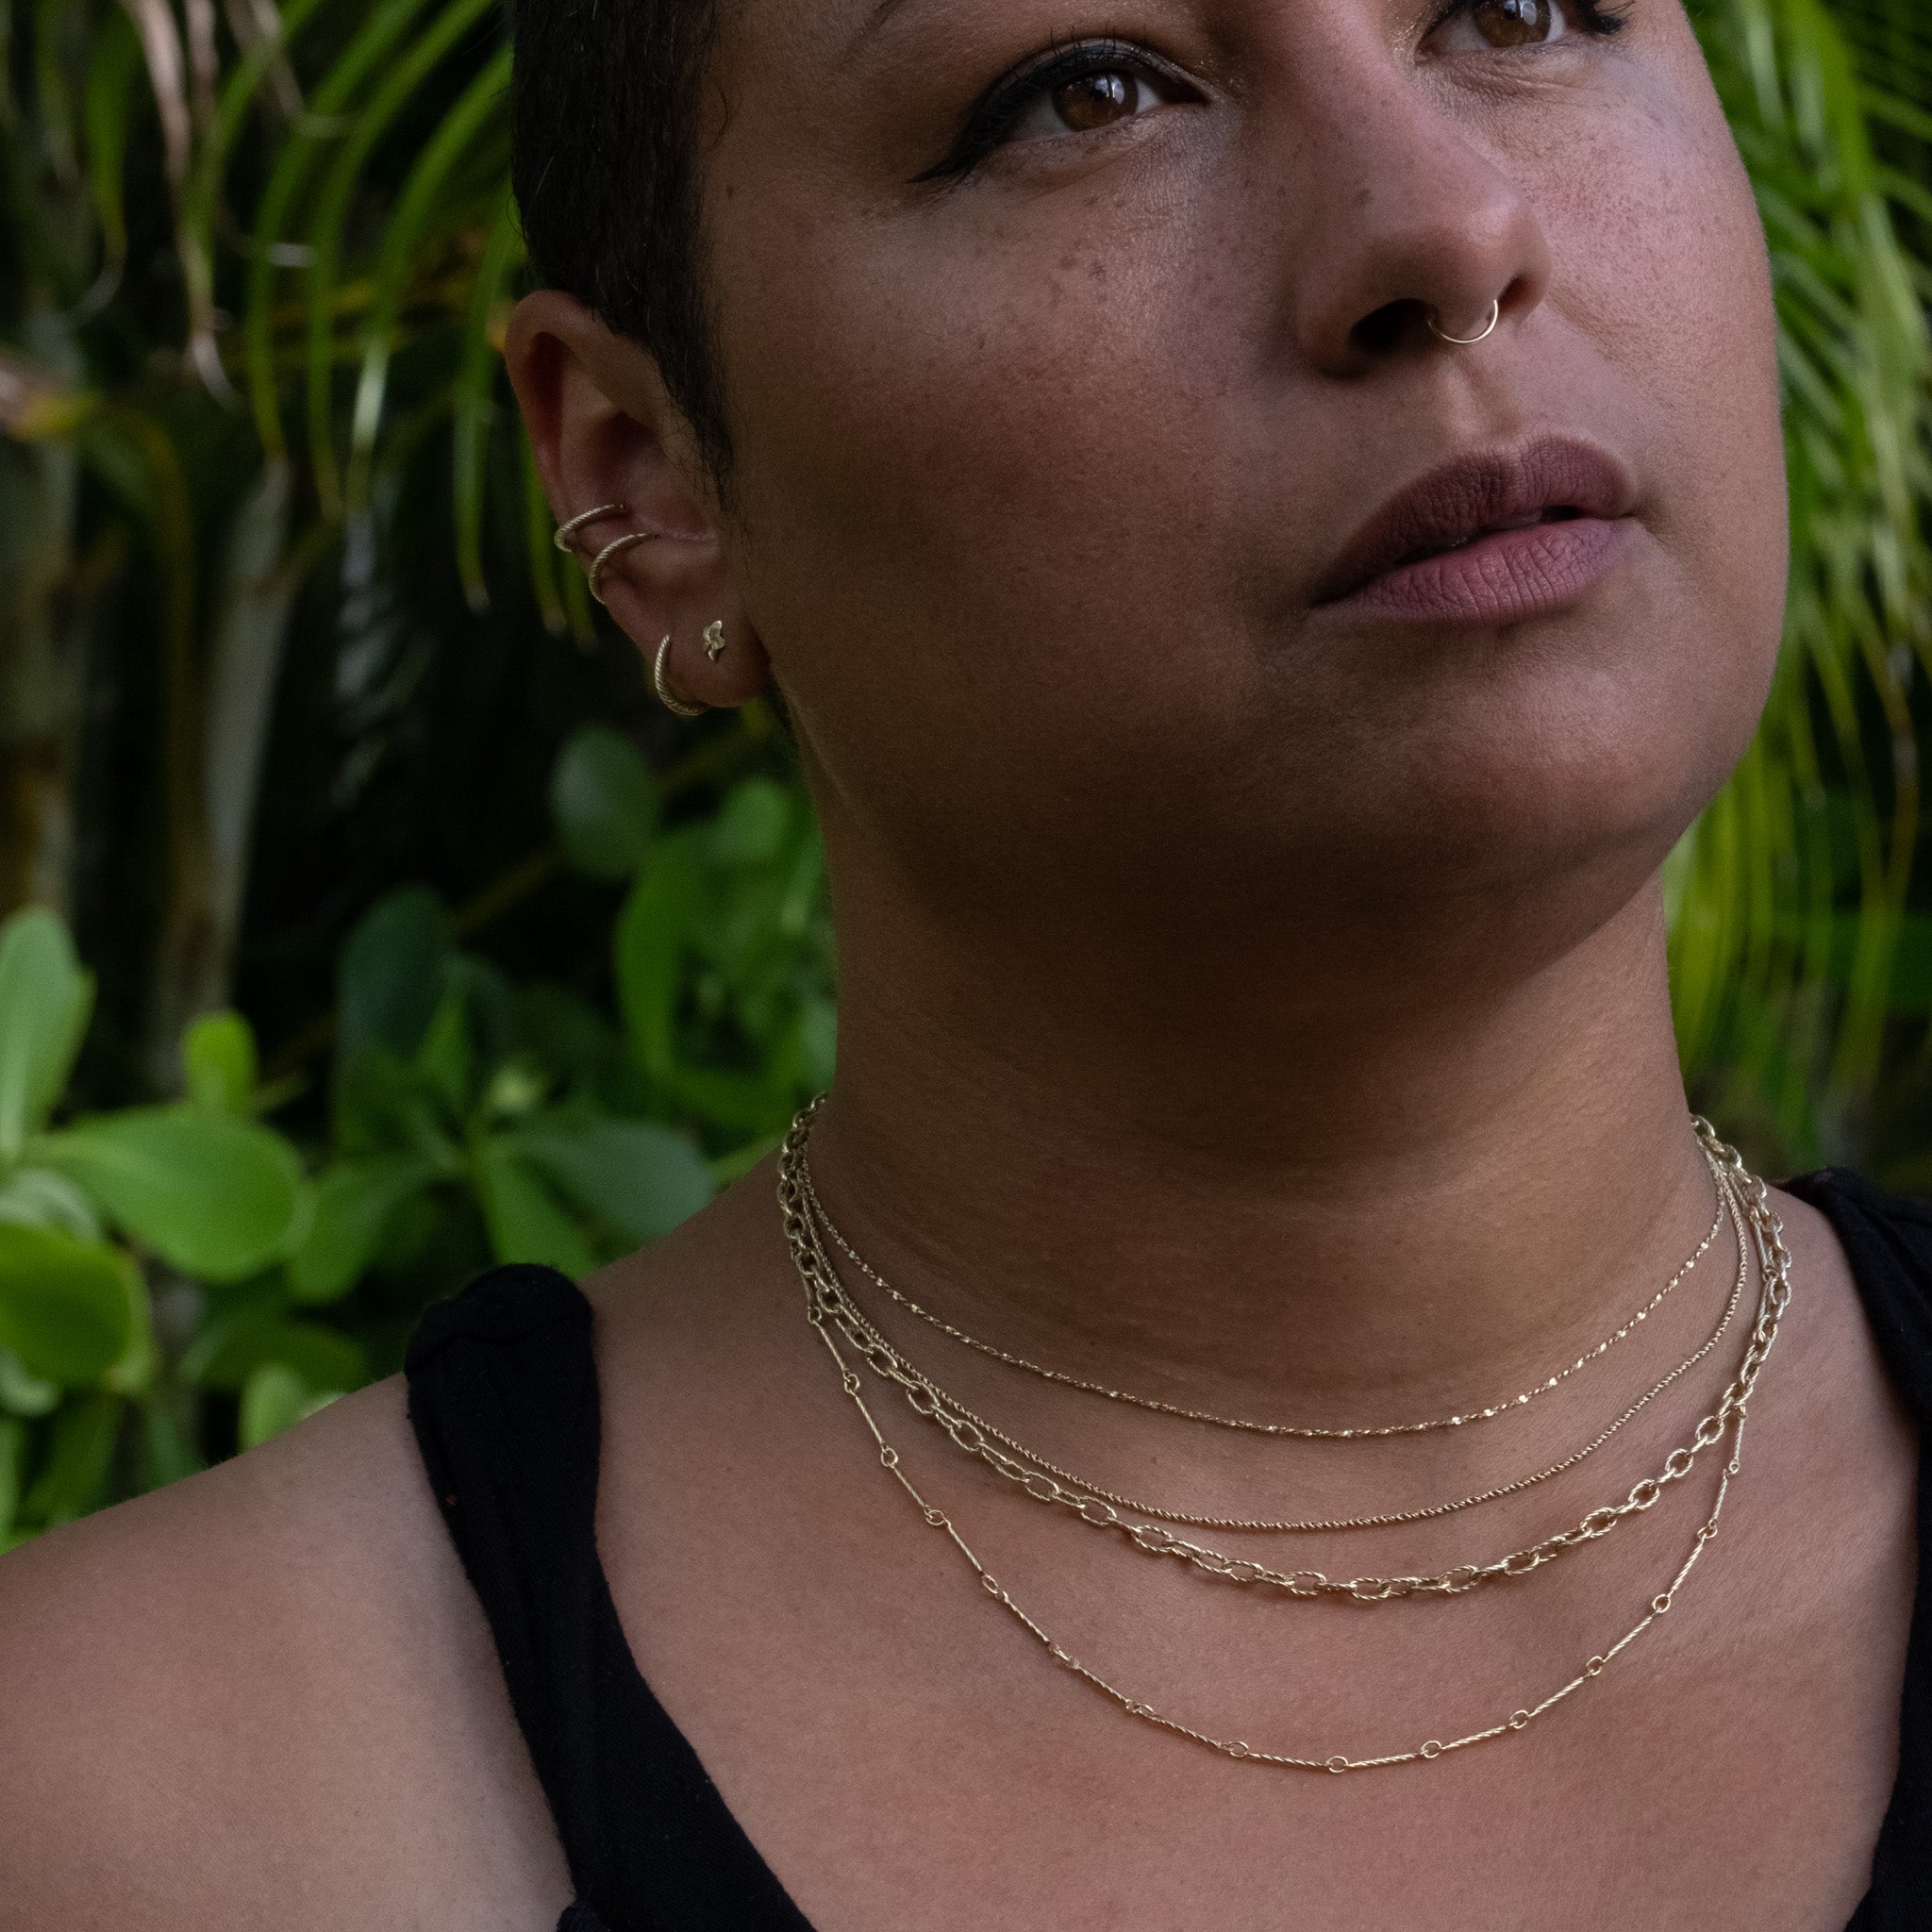 A close up of a person wearing an Aiden Jae Starshine Chain Necklace.